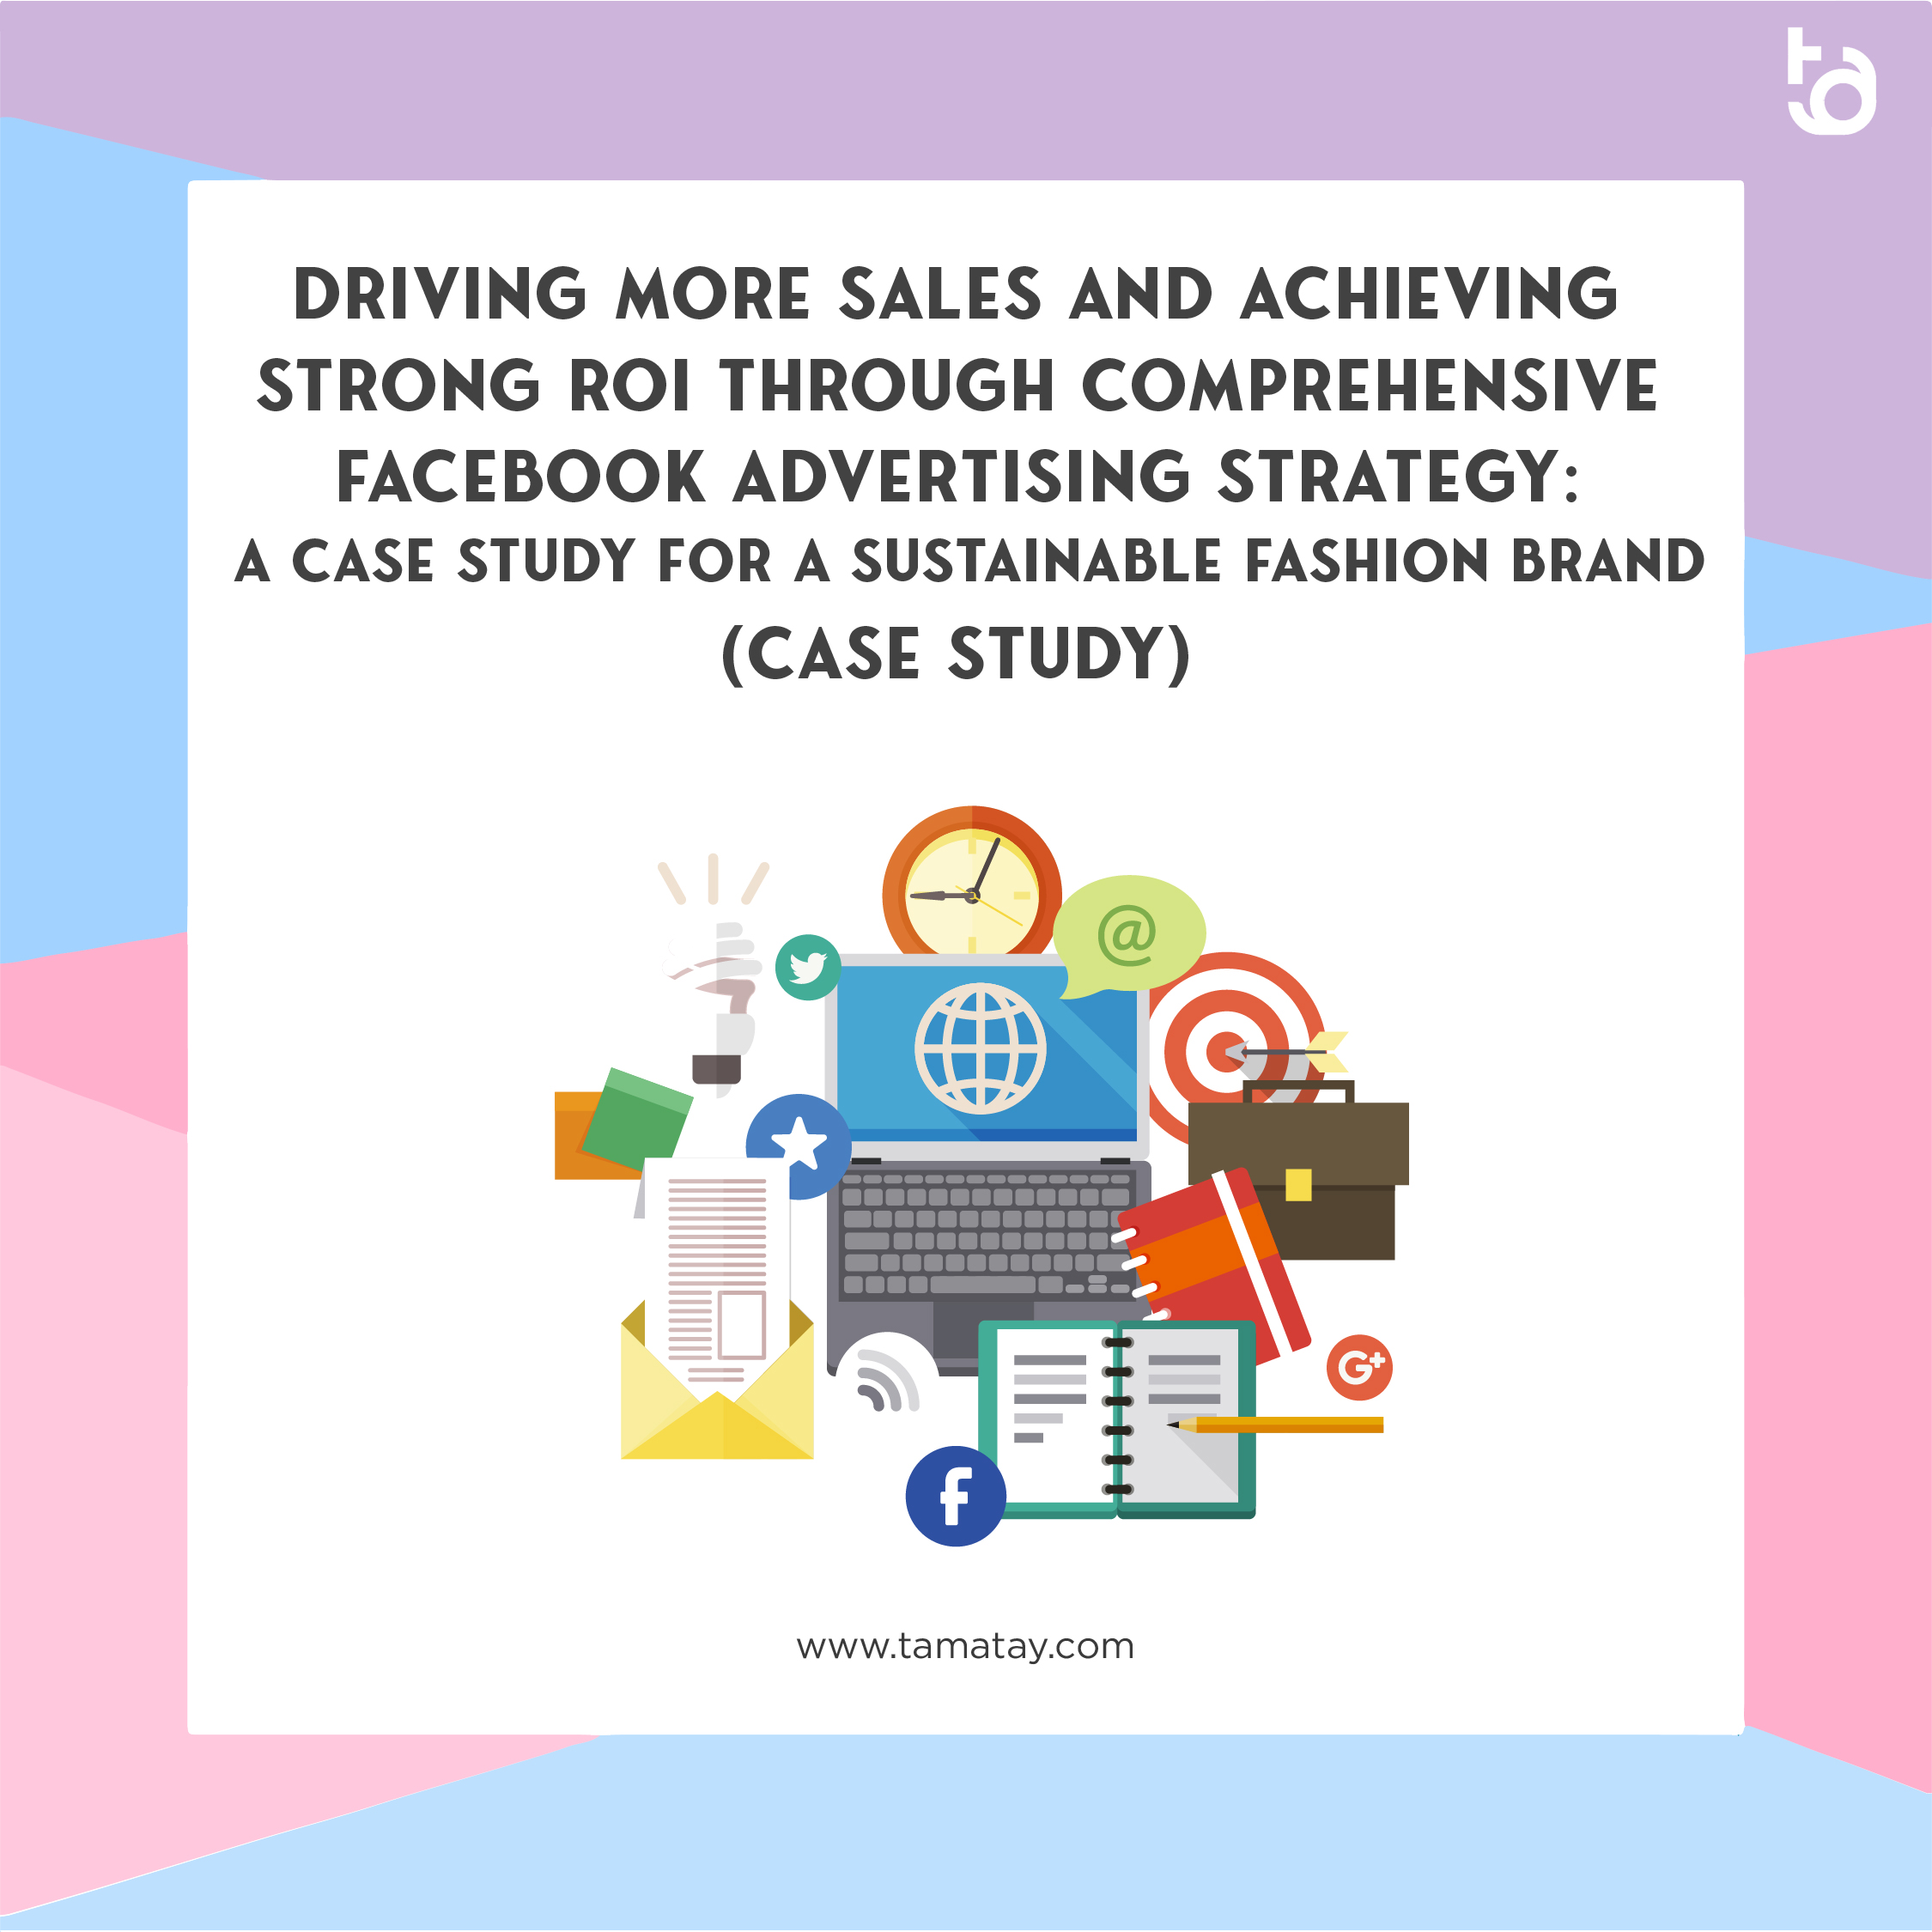 Driving More Sales and Achieving Strong ROI through Comprehensive Facebook Advertising Strategy: A Case Study for a Sustainable Fashion Brand